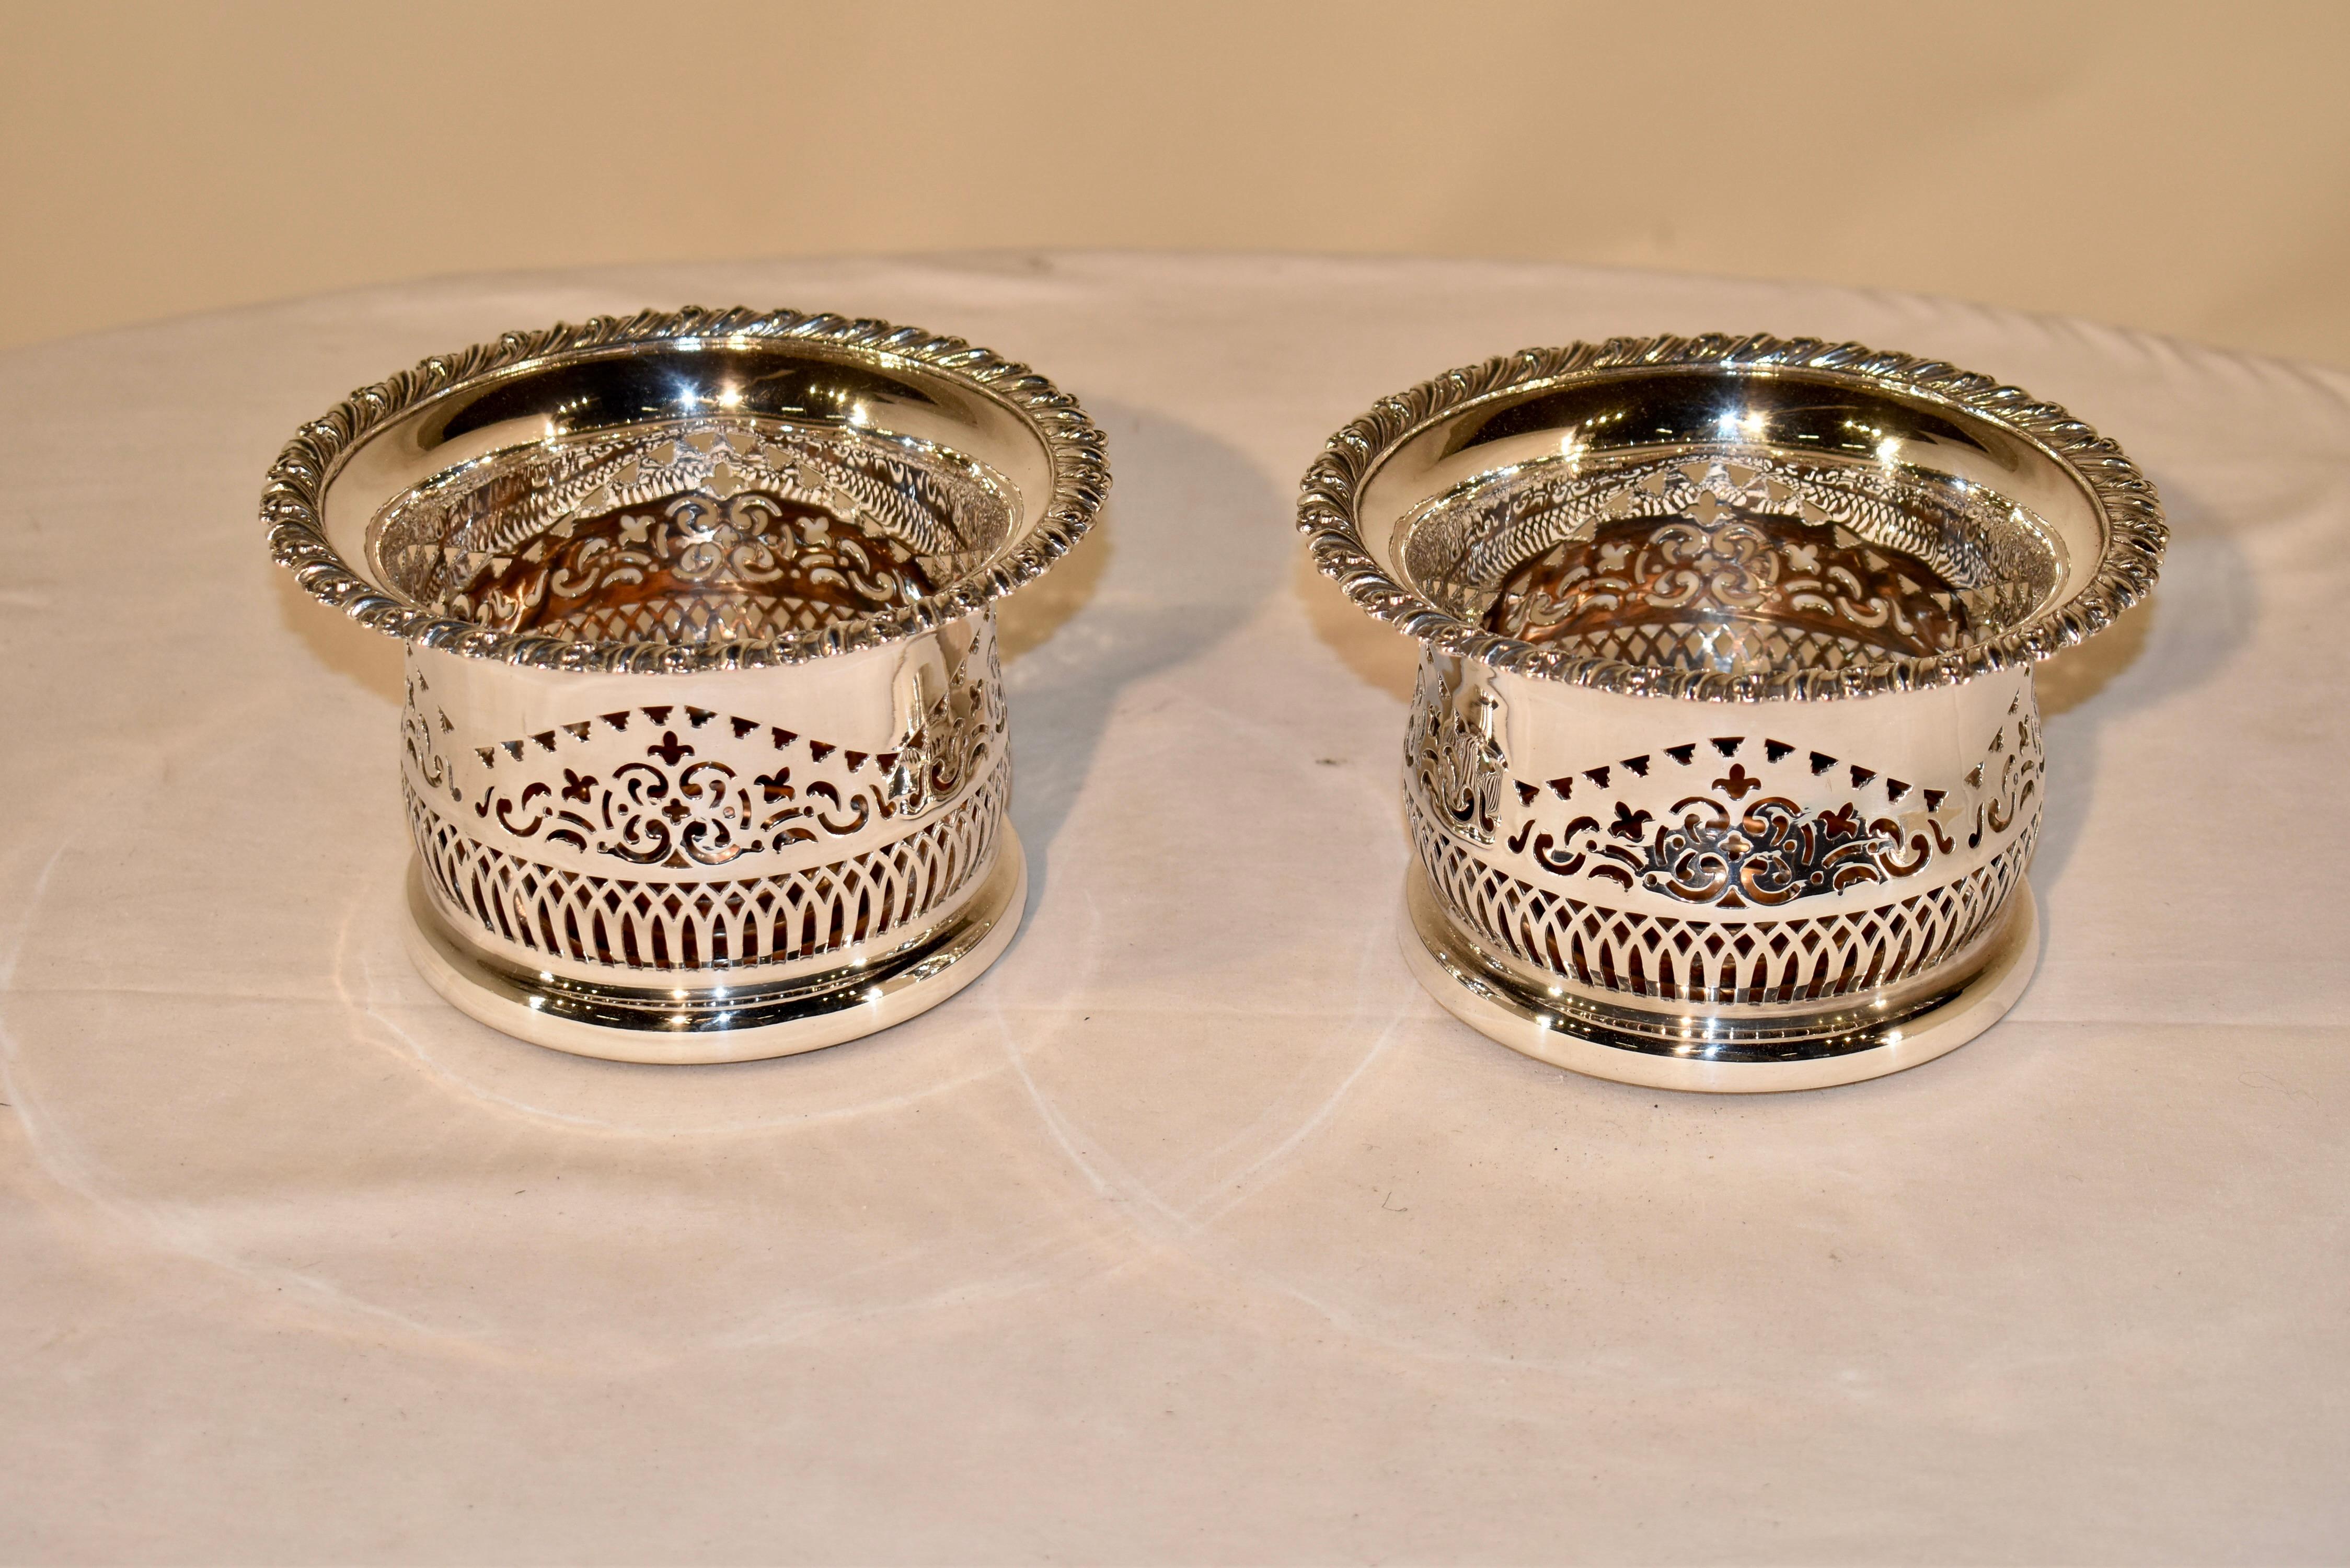 Pair of lovely late 19th century large bottle coasters from England. The pair is silver plated and have oak bases. They have scrolled borders, and are pierced decorated on the sides. These would be a stunning addition to any table or sideboard.